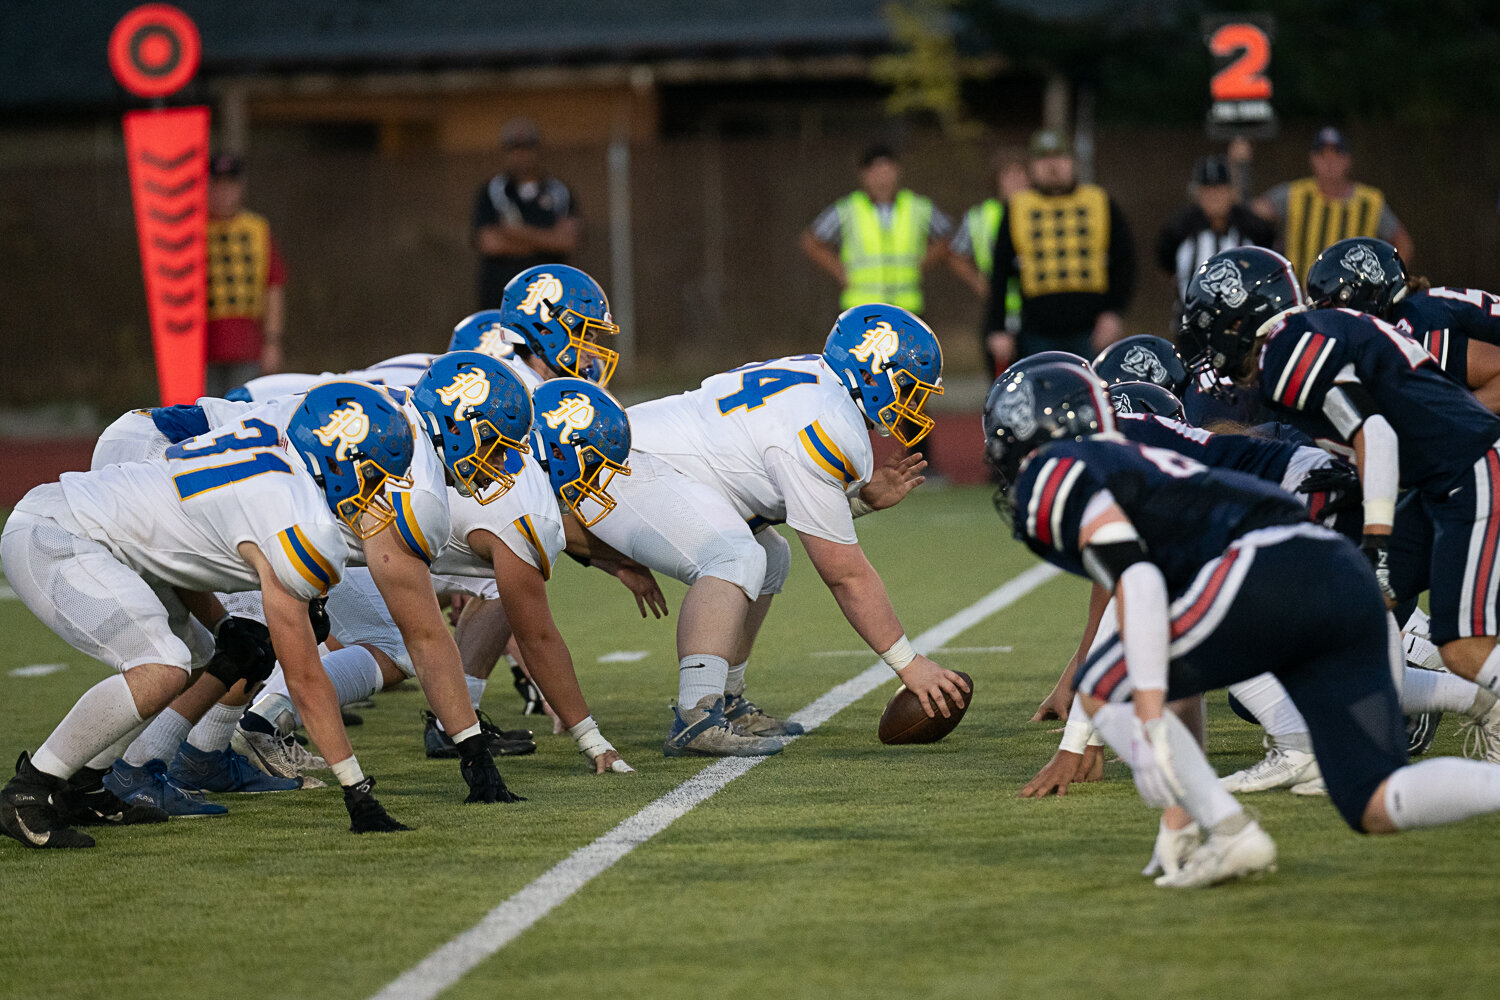 Rochester lines up for a play during the first half of its 20-14 overtime win over Black Hills on Sept. 15 at Tumwater District Stadium.